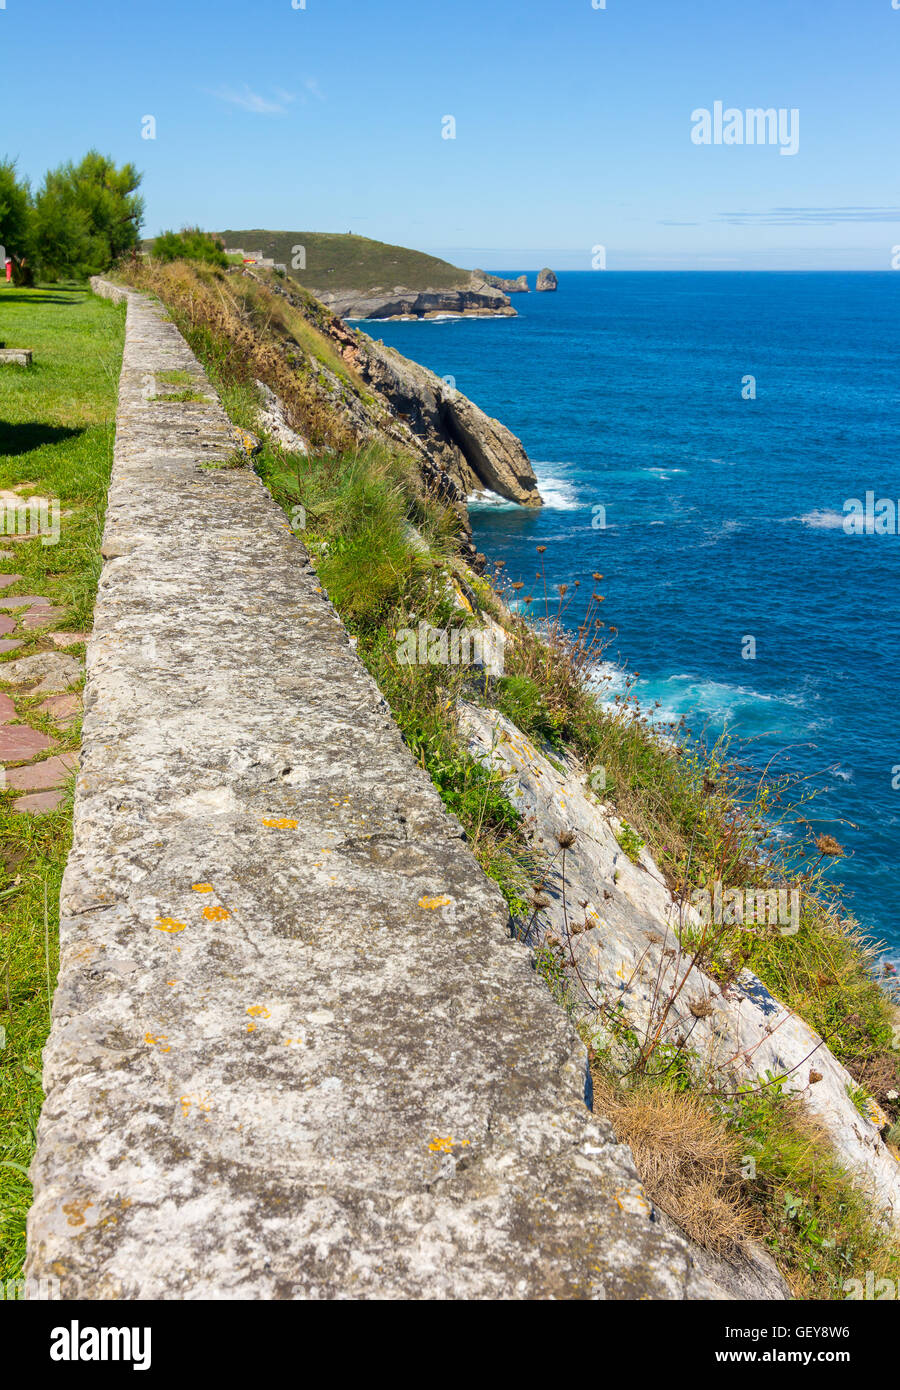 Cliff area in the resort town of Llanes, Spain Stock Photo